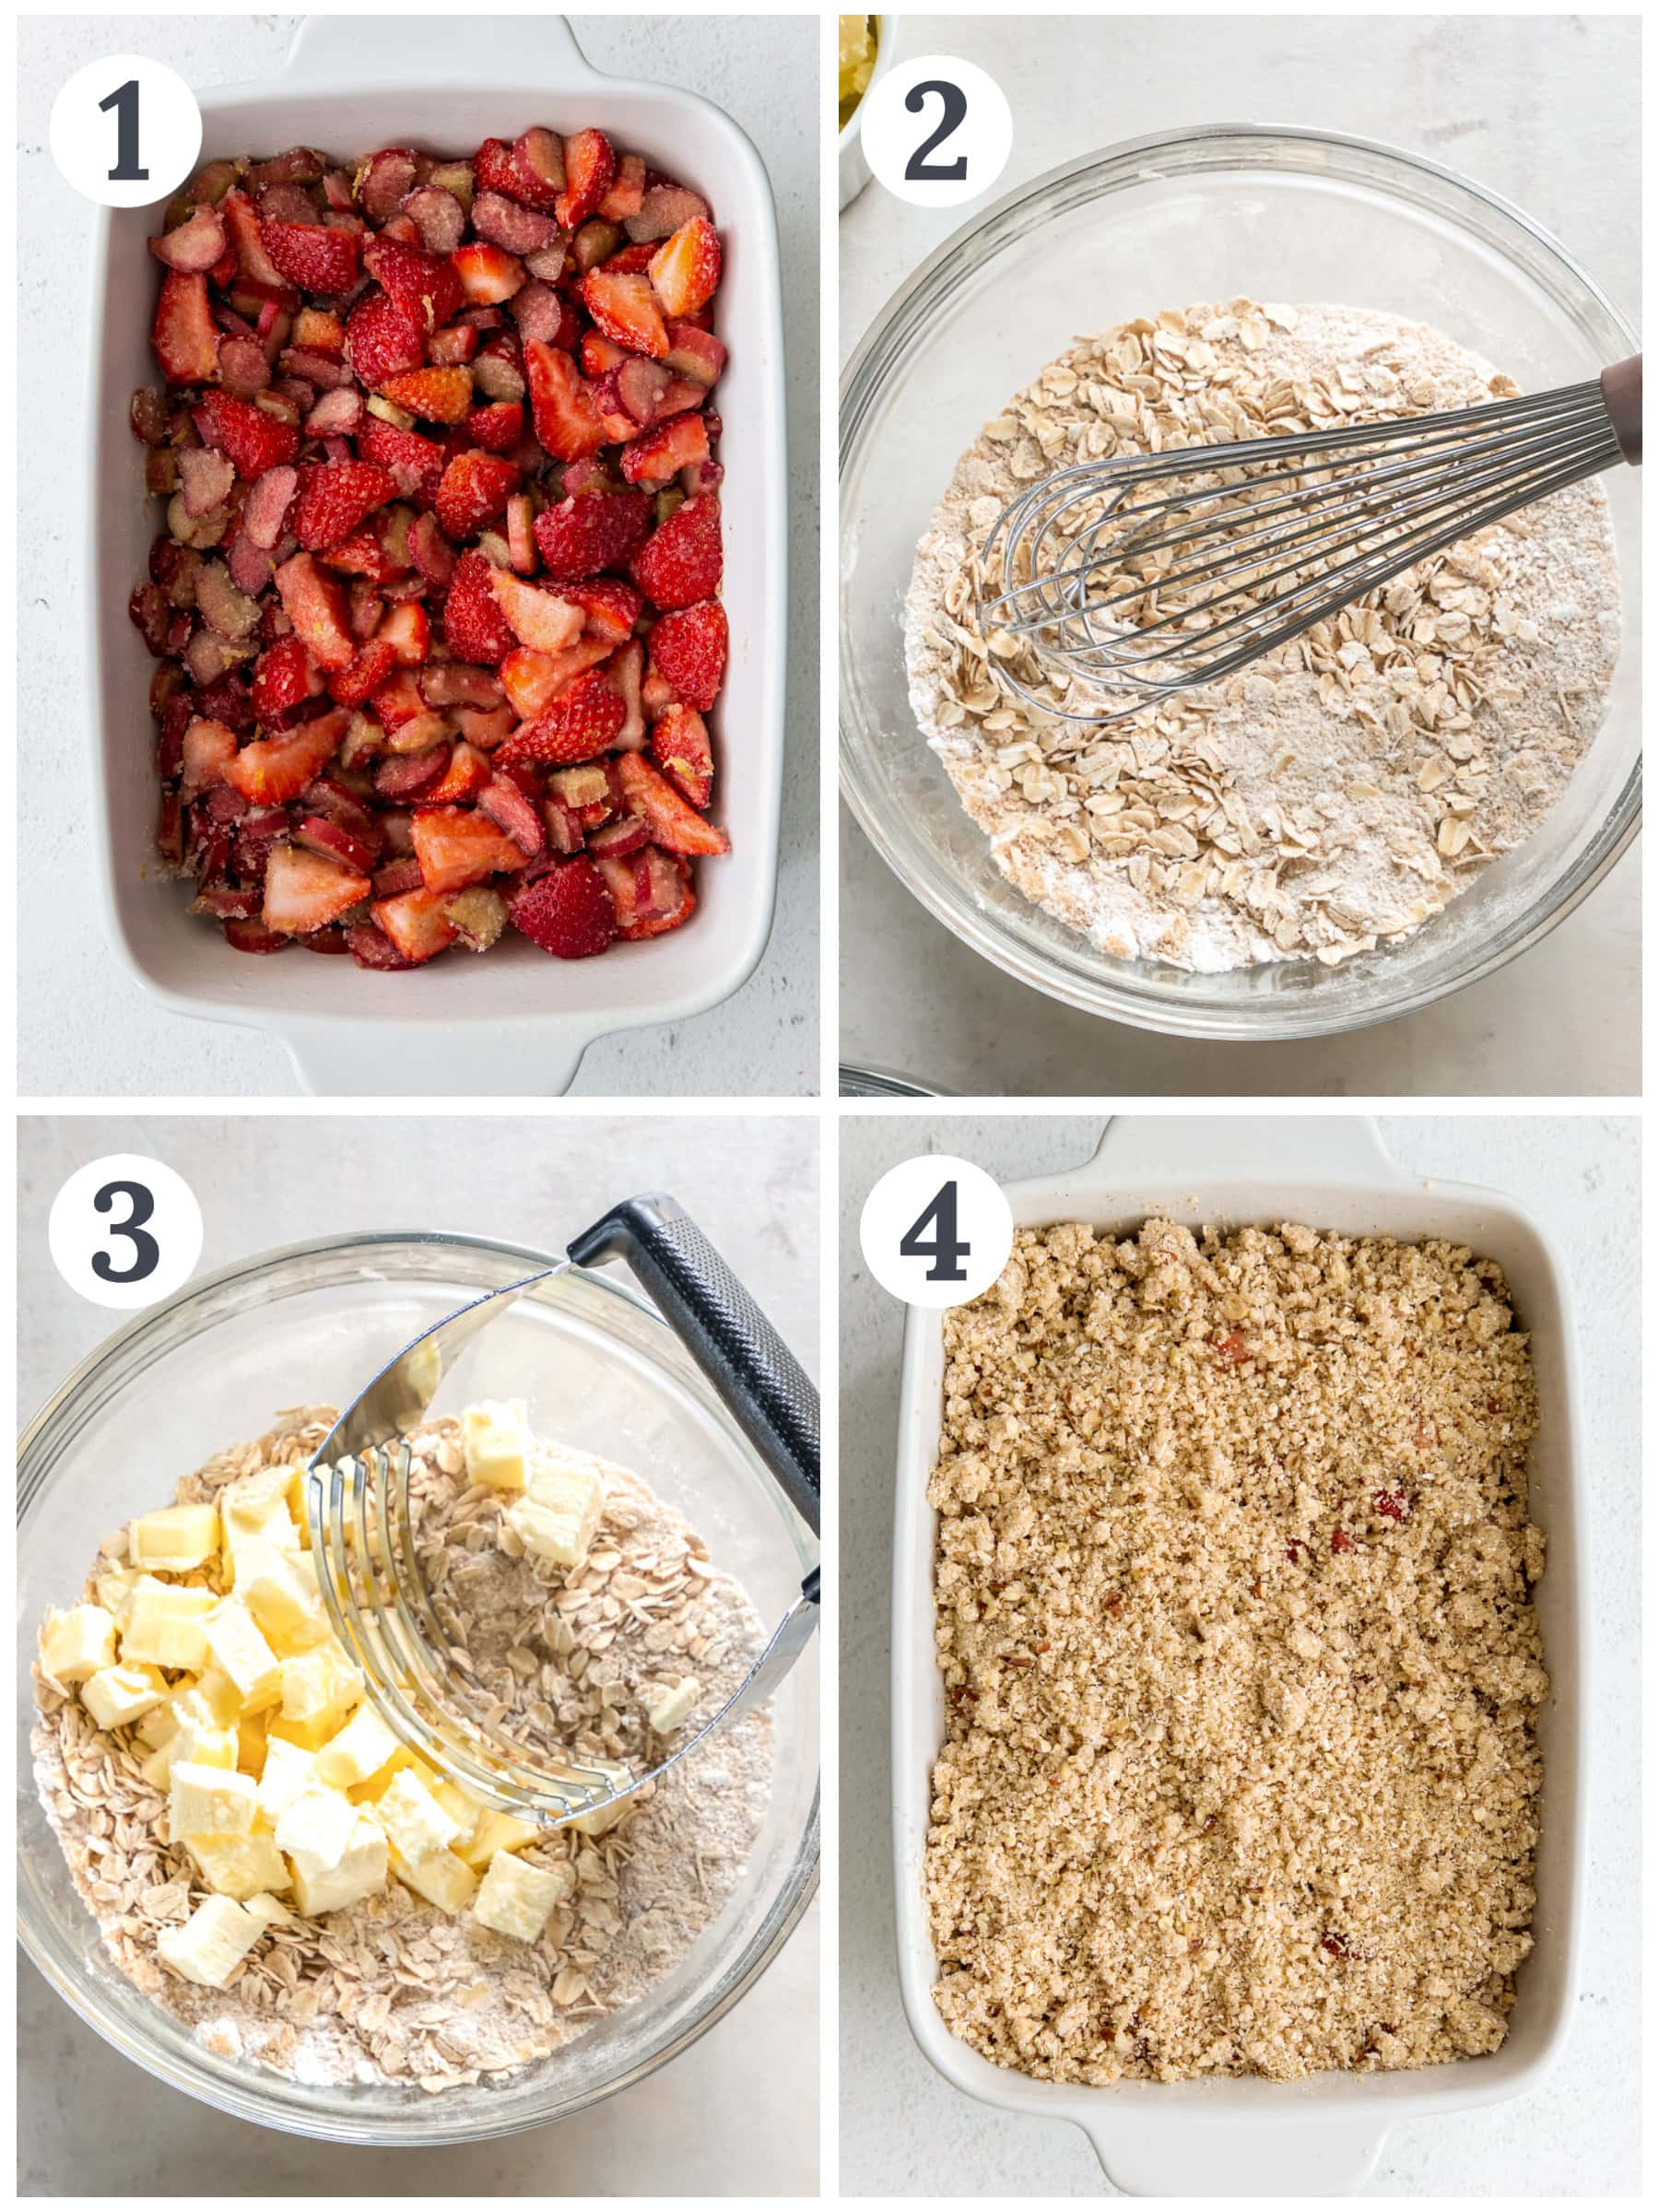 photo collage demonstrating how to make strawberry rhubarb crisp filling and oat crumble topping.